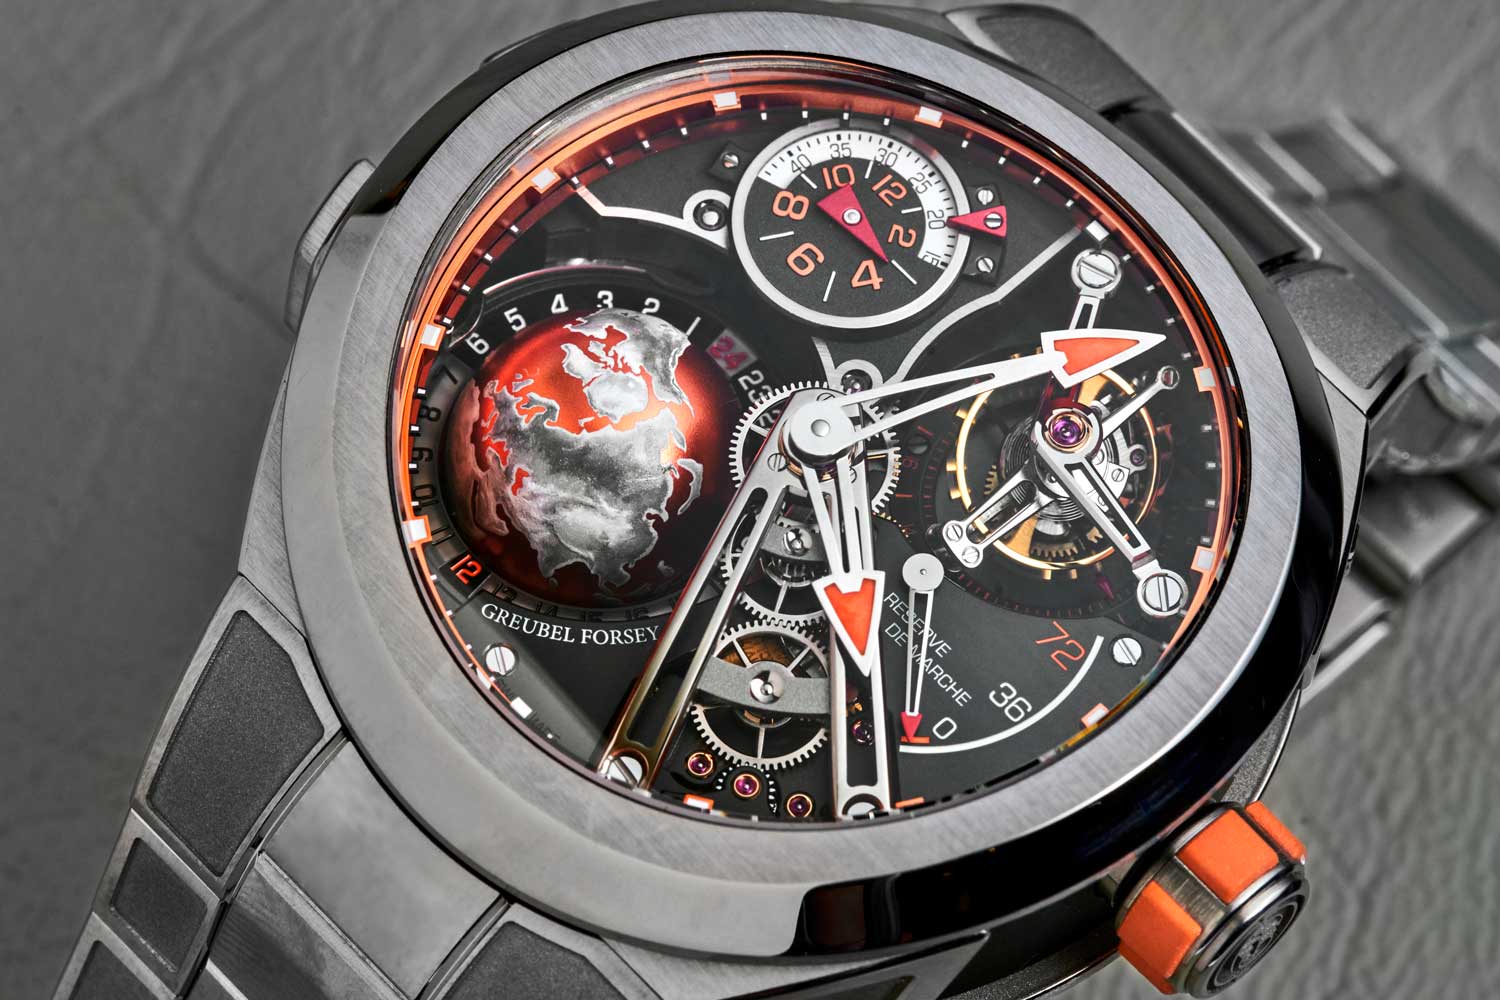 Greubel Forsey GMT Sport “Sincere Fine Watches Special Edition” (© Revolution)